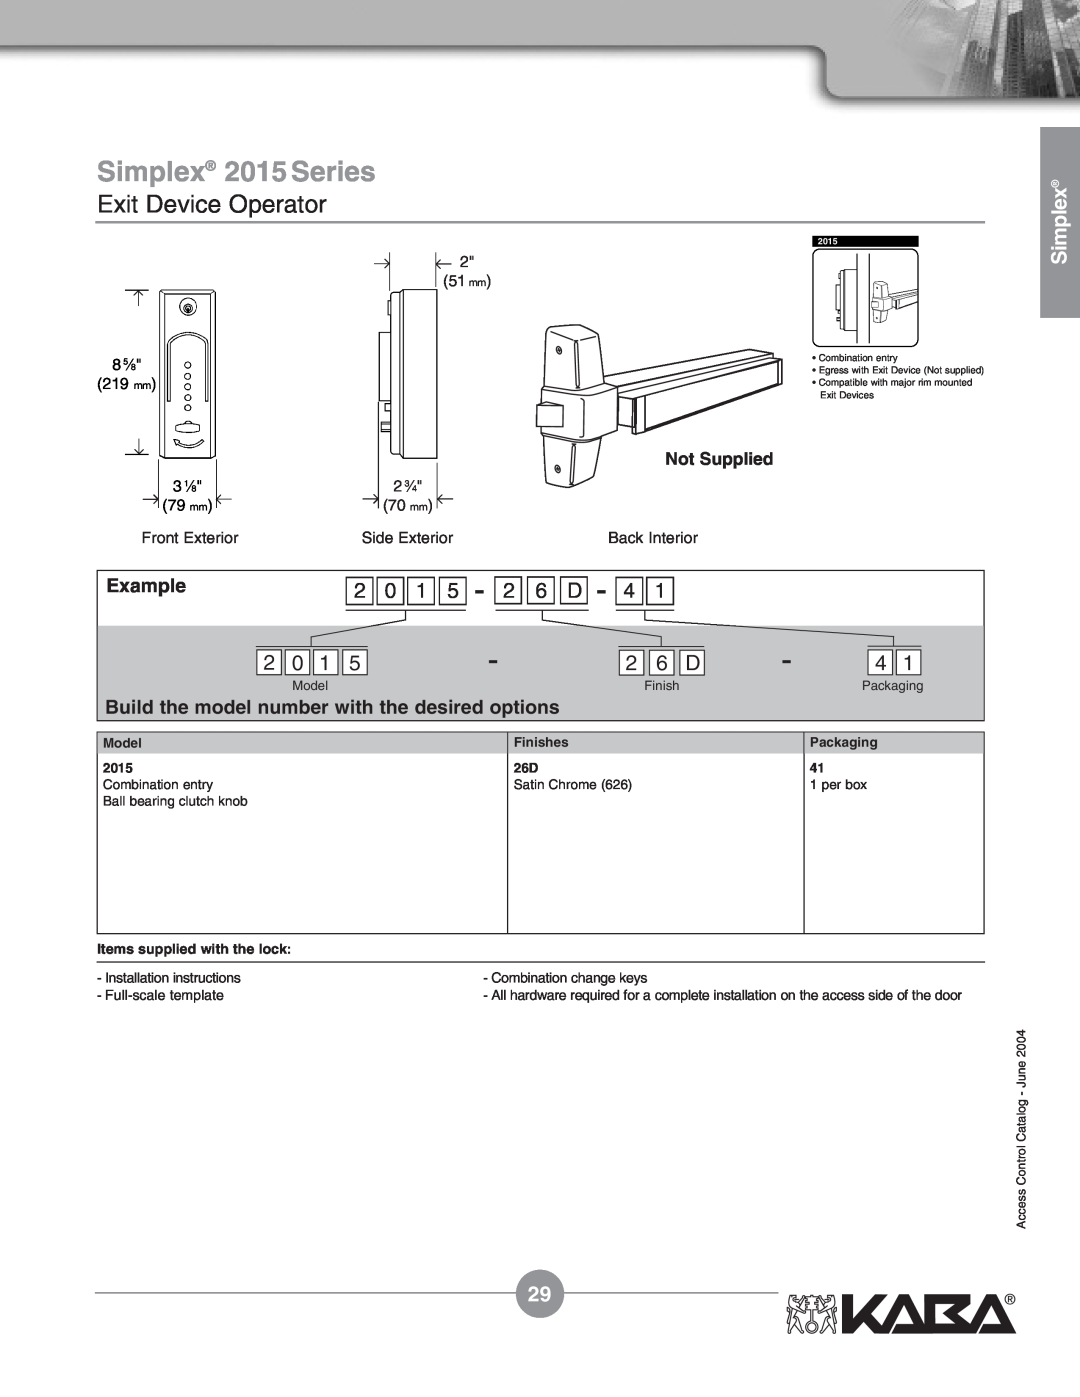 Assa Mechanical Pushbutton Locks manual 2 0 1, Simplex 2015 Series, Exit Device Operator, 2 6 D, Example, Not Supplied 